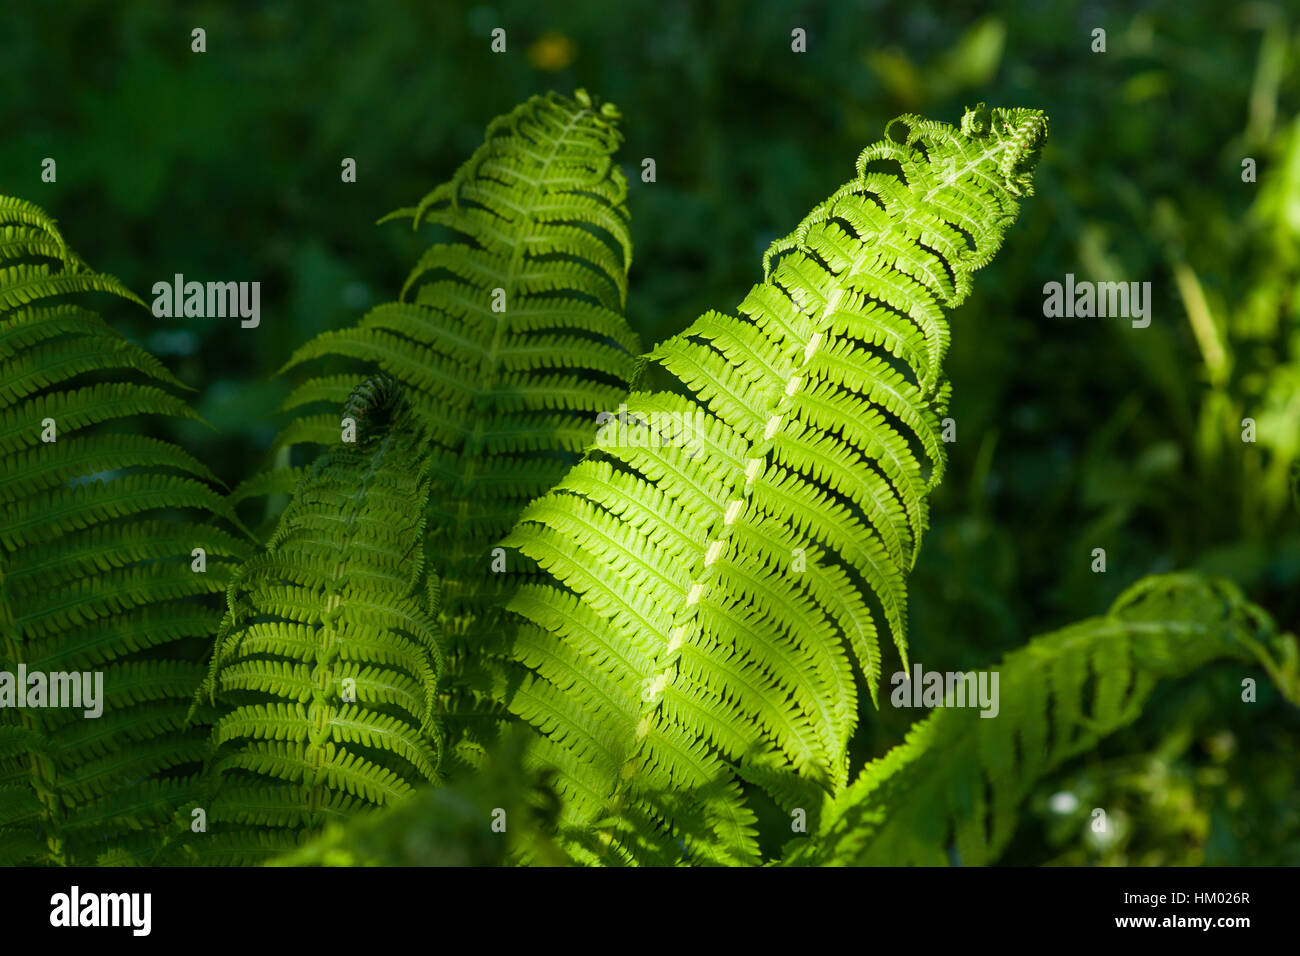 Details of the fern grasses in the spring forest. Sunlit fresh plants, array of green colors, play of light and shadows. Stock Photo